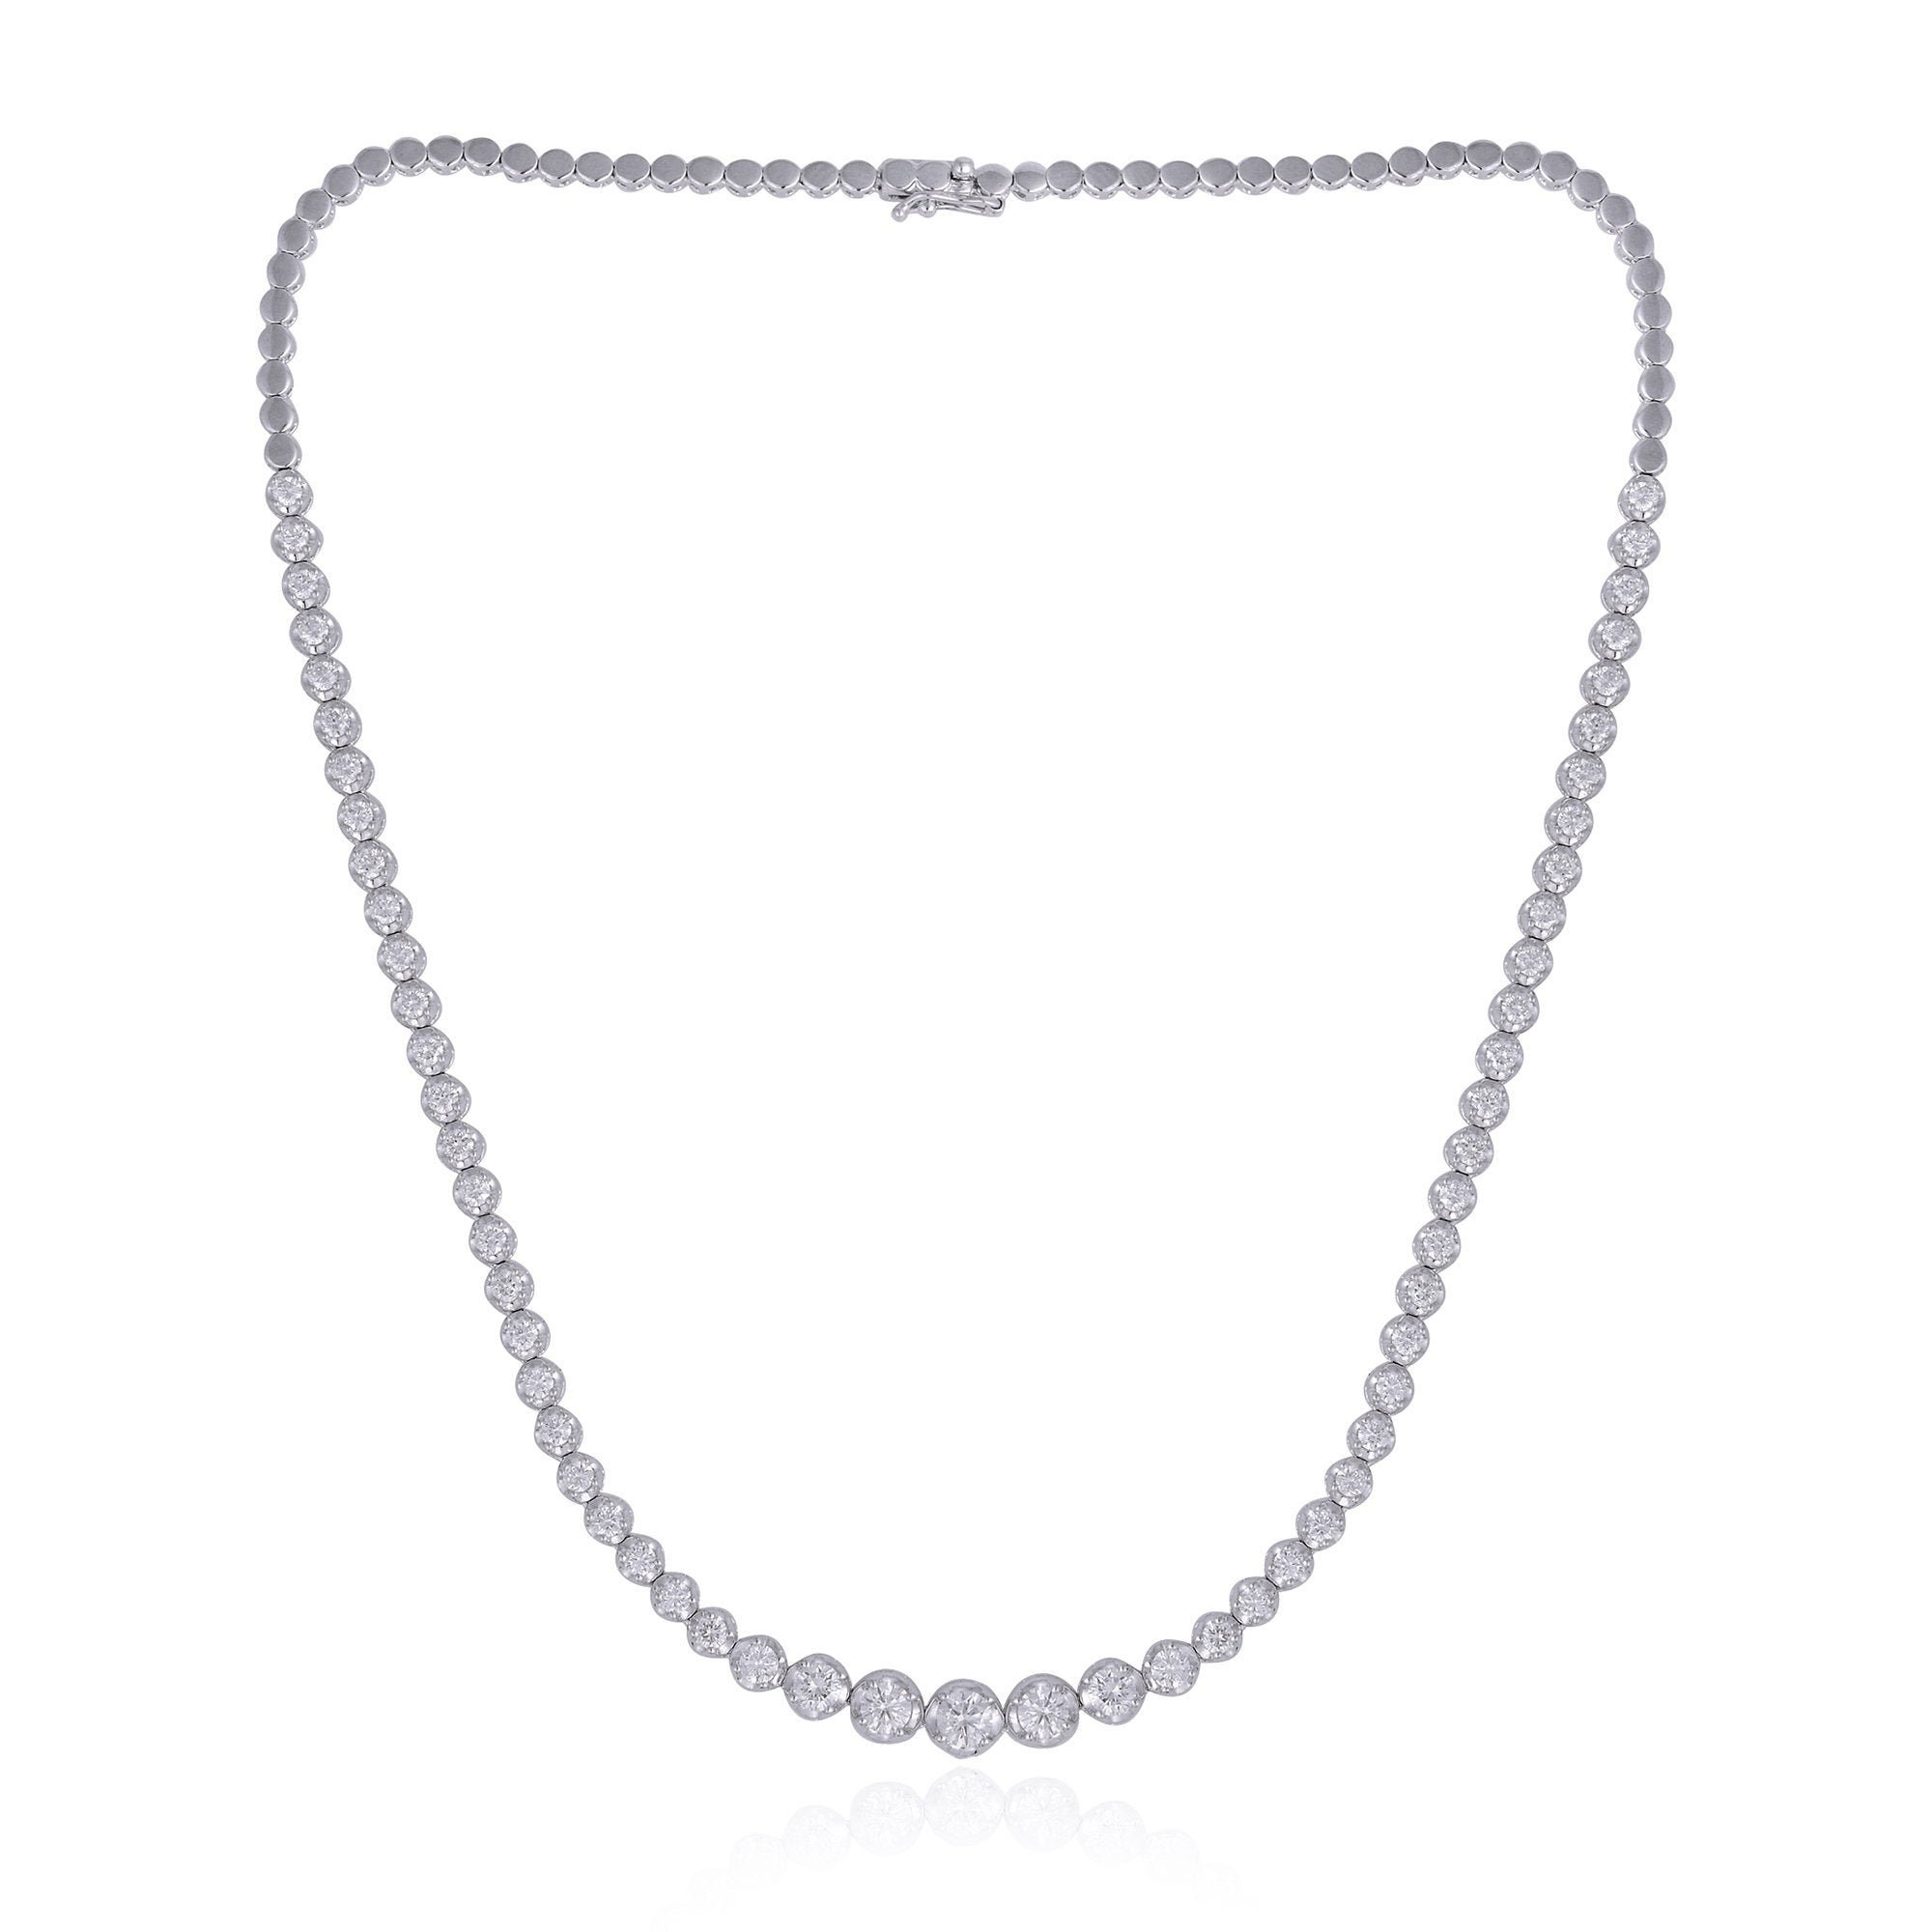 Round Diamond Pave Chain Necklace 16 Inches Long Solid 14K White Gold Natural 4.60 Ct. Hi Color Si Clarity Handmade Jewelry